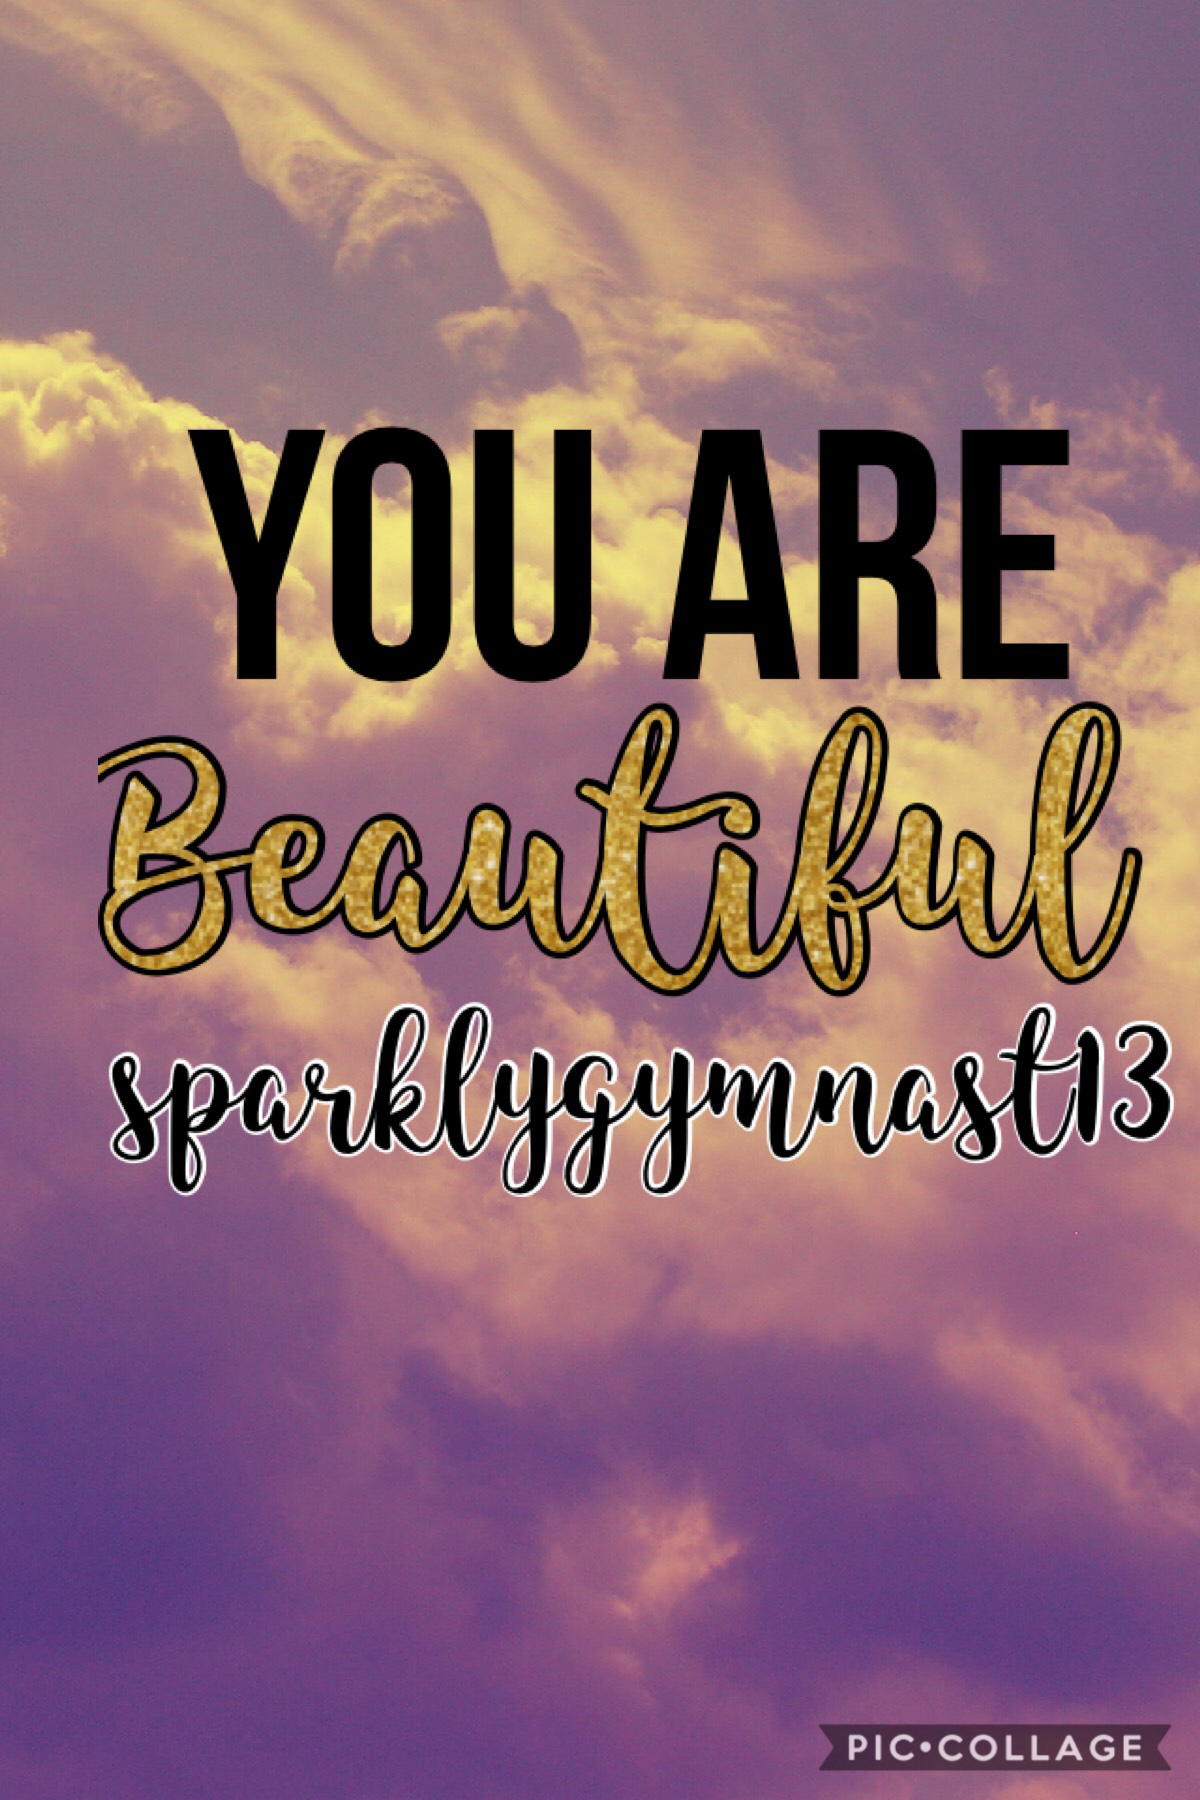 you are beautiful ☺️🥰